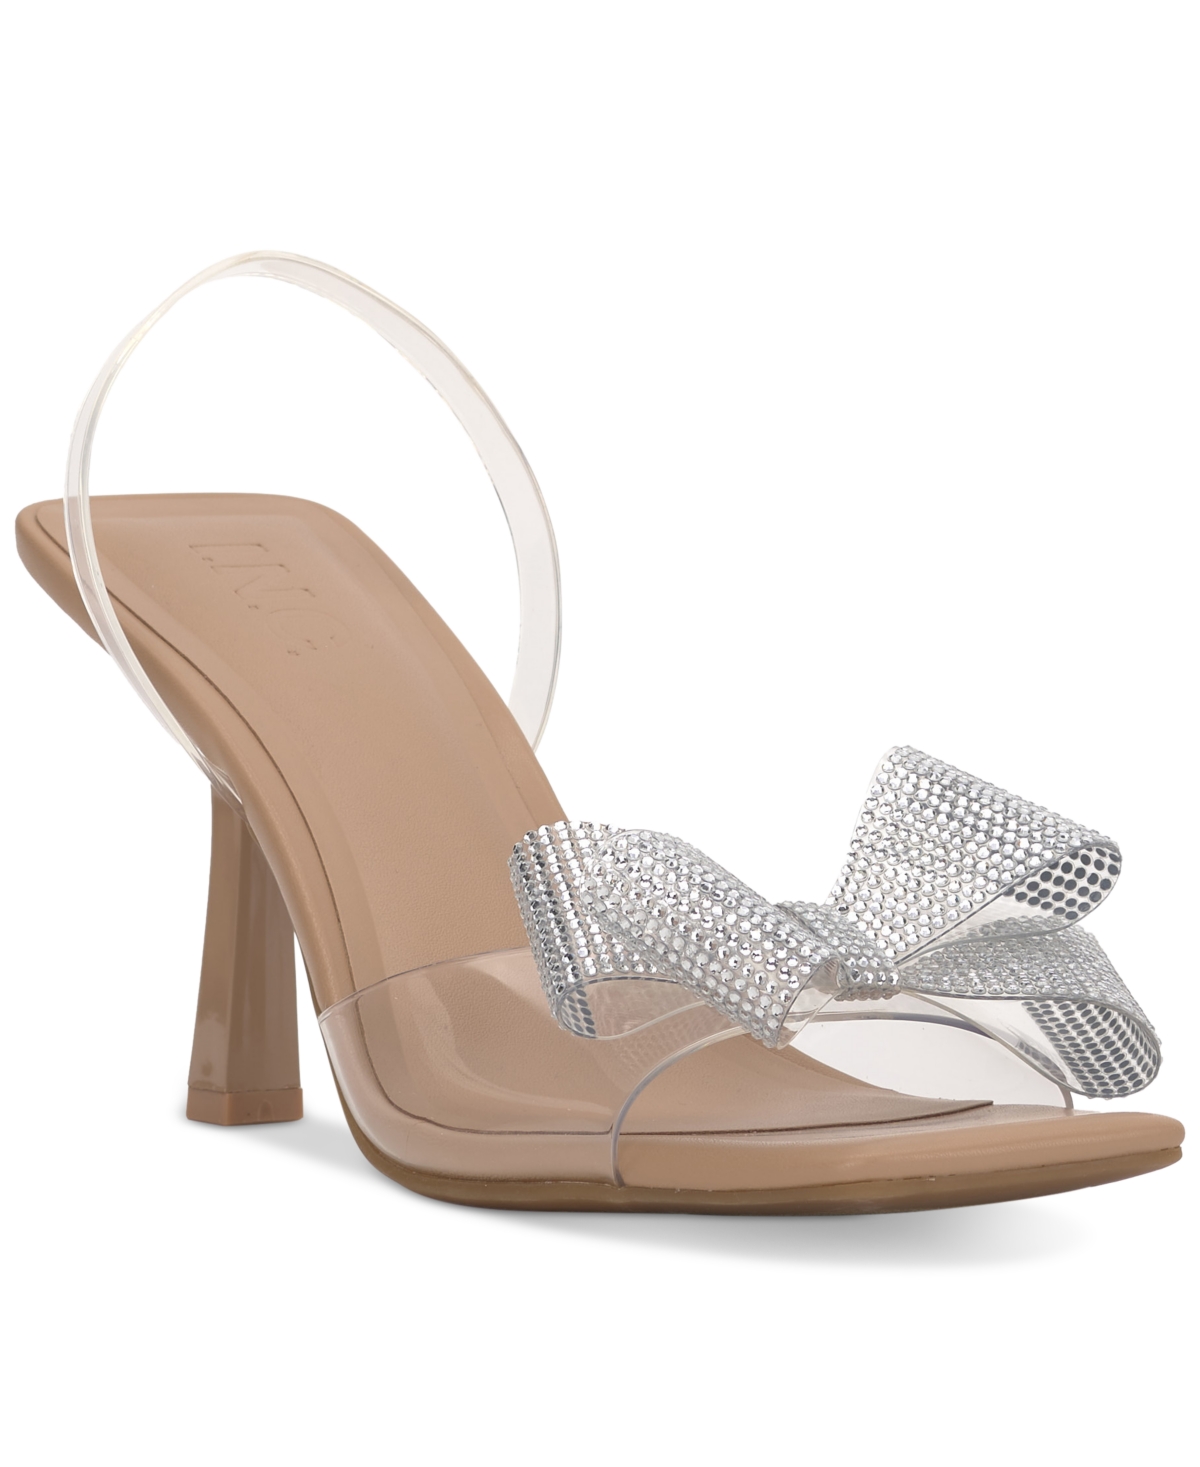 Women's Aesca Bow Slingback Sandals, Created for Macy's - Clear Vinyl